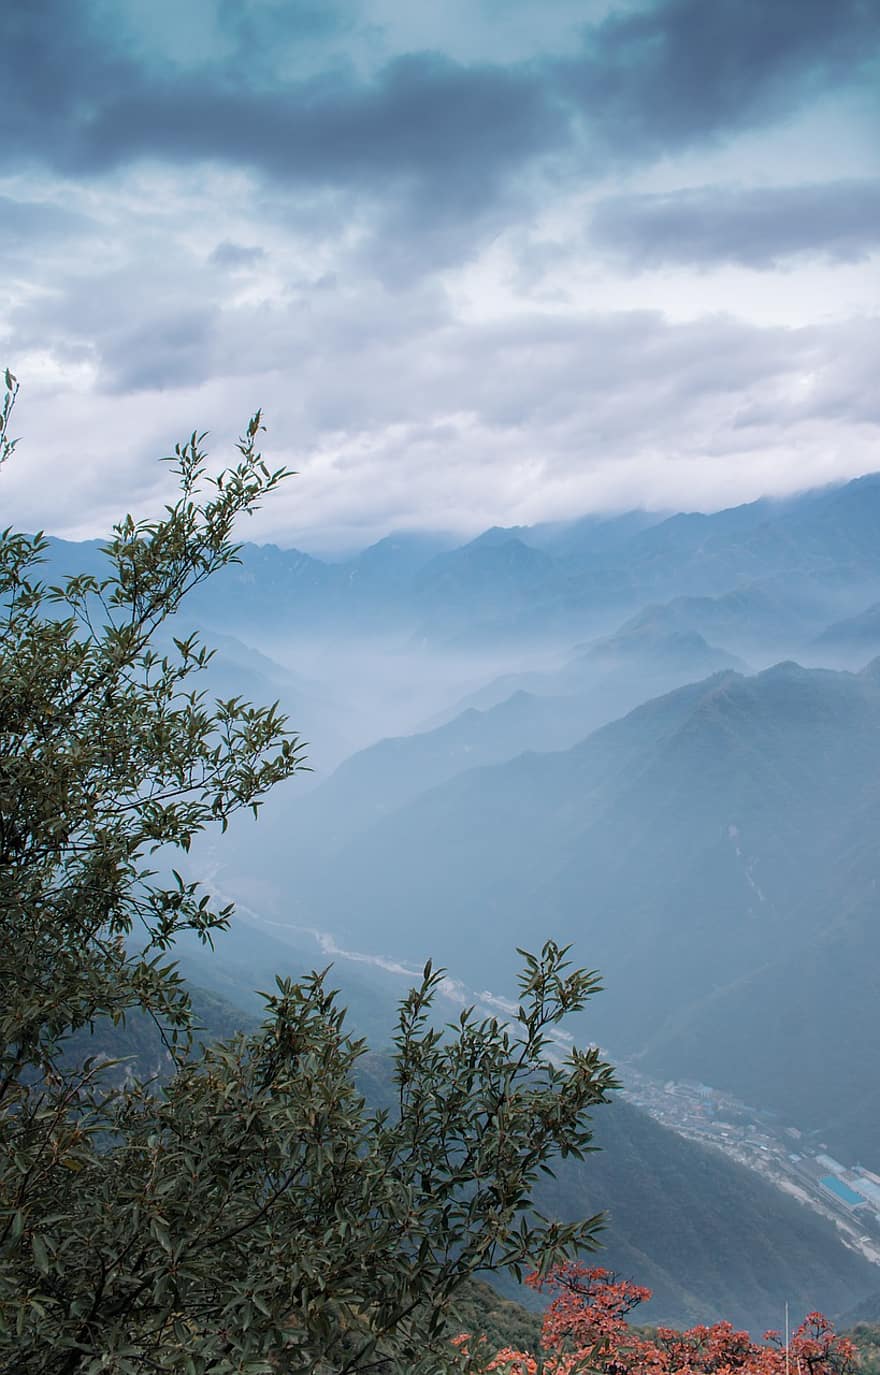 Mountains, Nature, Fog, Valley, City, Town, Scenery, Summit, Clouds, Sky, Landscape